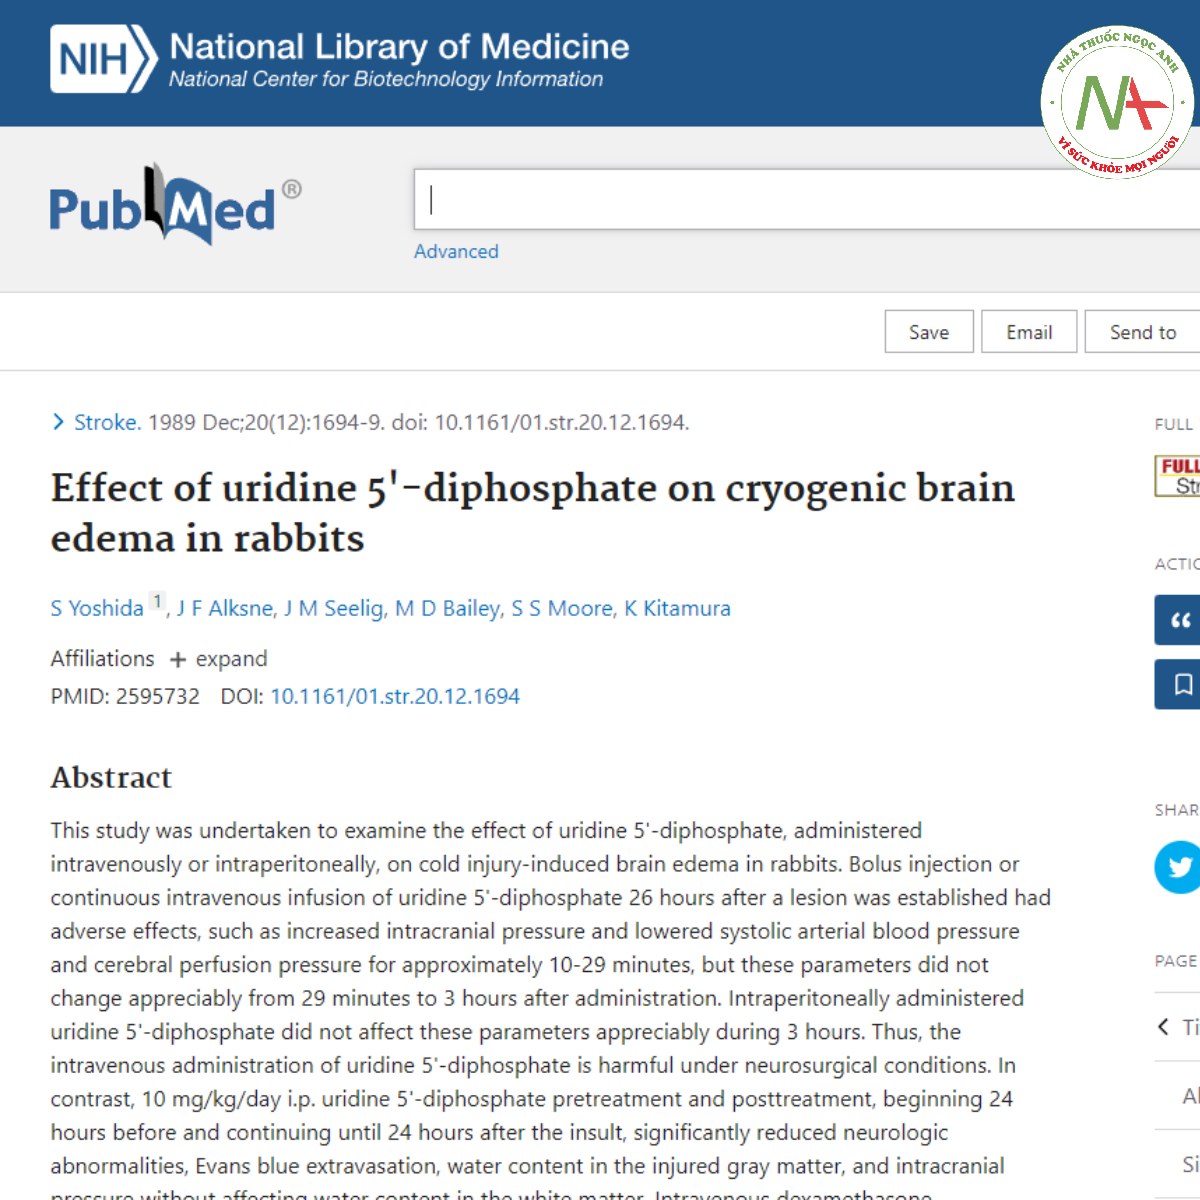 Effect of uridine 5'-diphosphate on cryogenic brain edema in rabbits